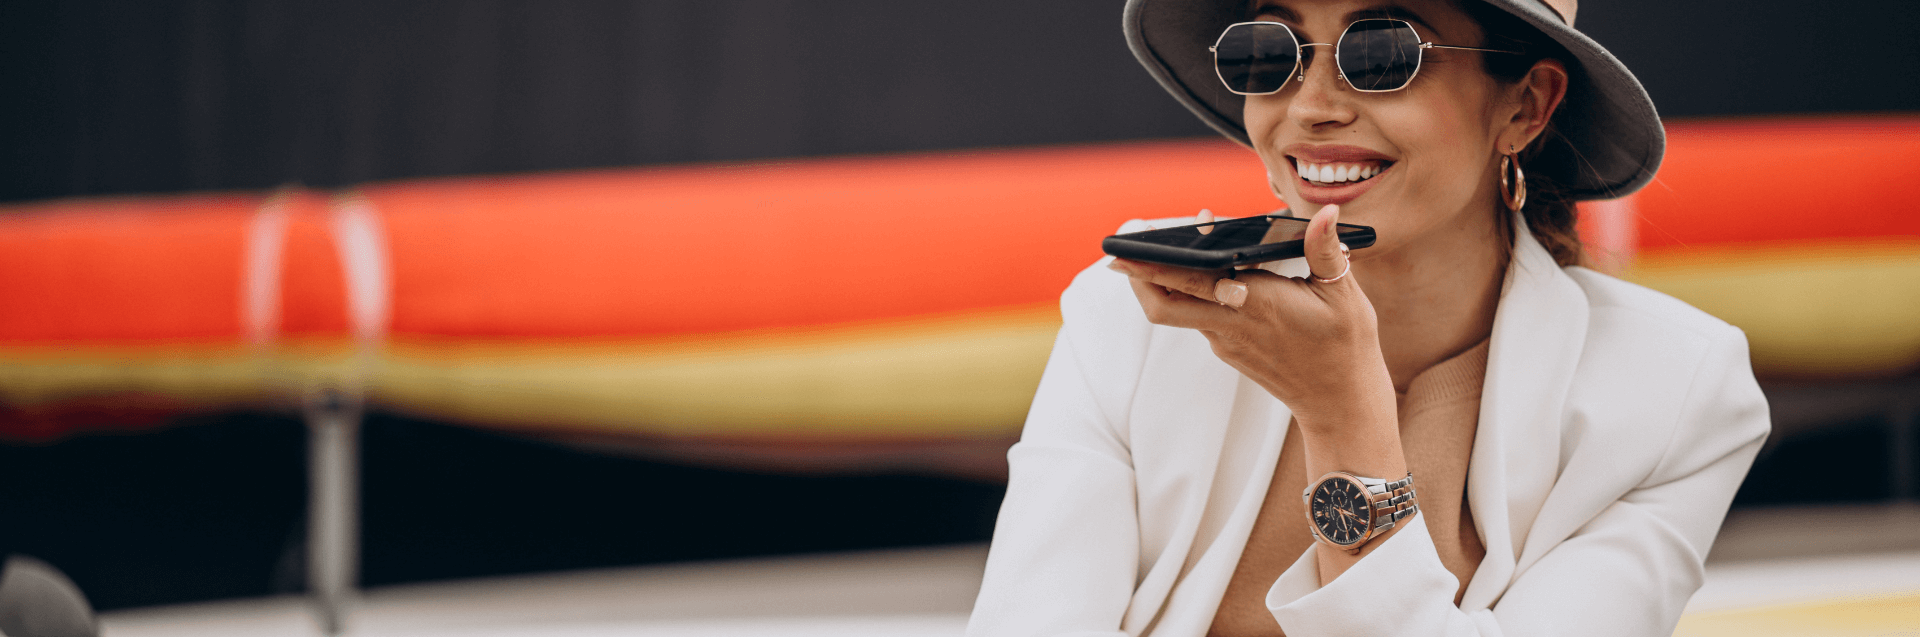 young-woman-wearing-hat-using-phone